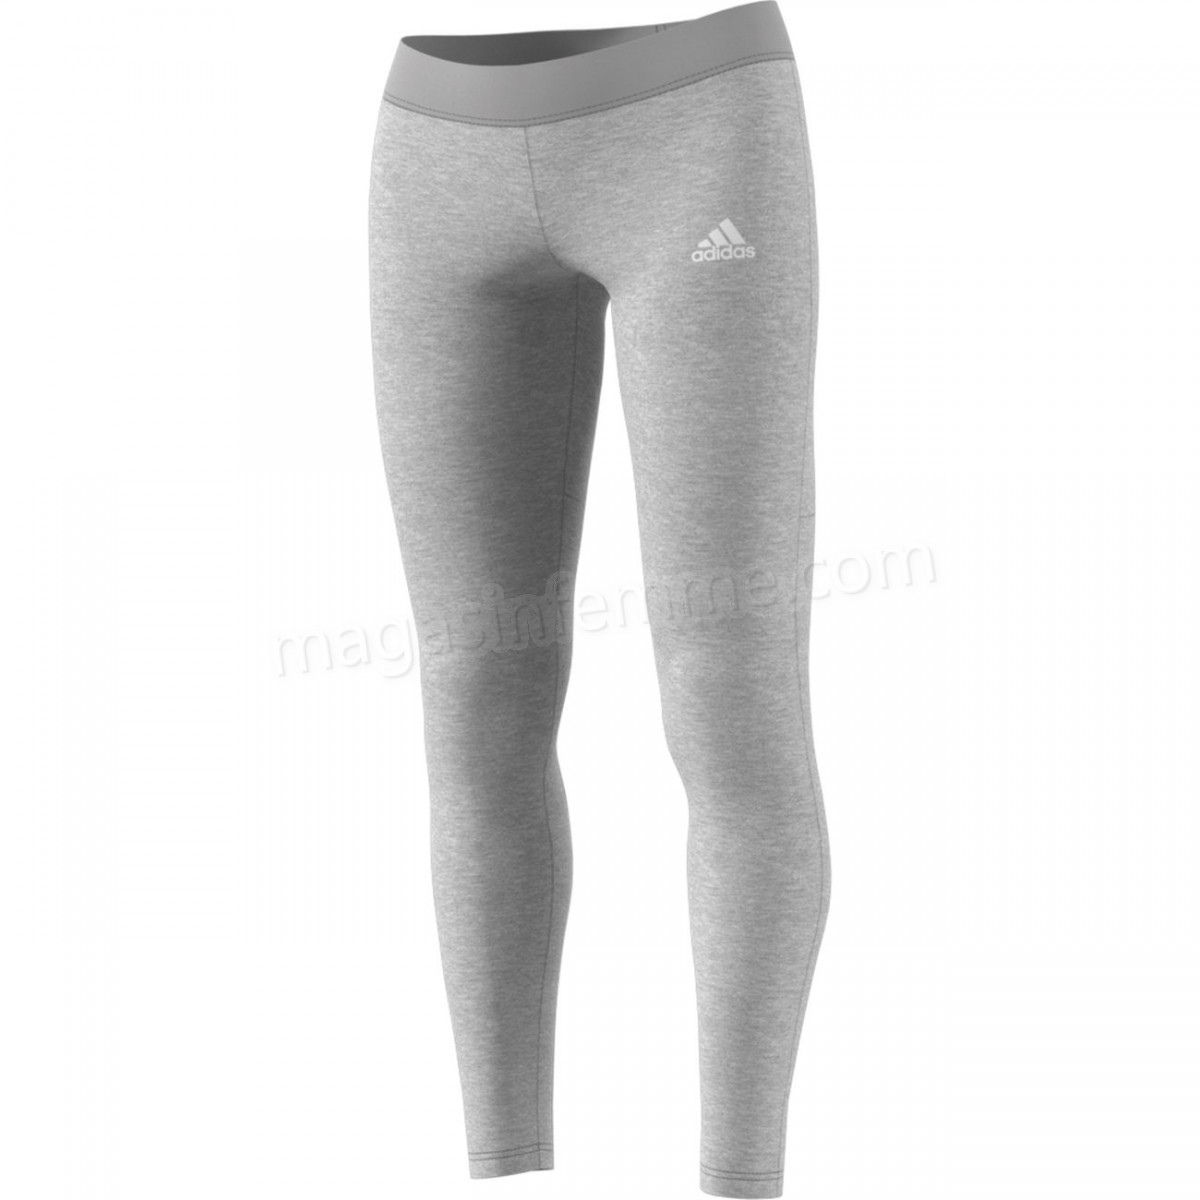 Adidas-Fitness femme ADIDAS Collant femme adidas Must Haves 3-Stripes en solde - -5